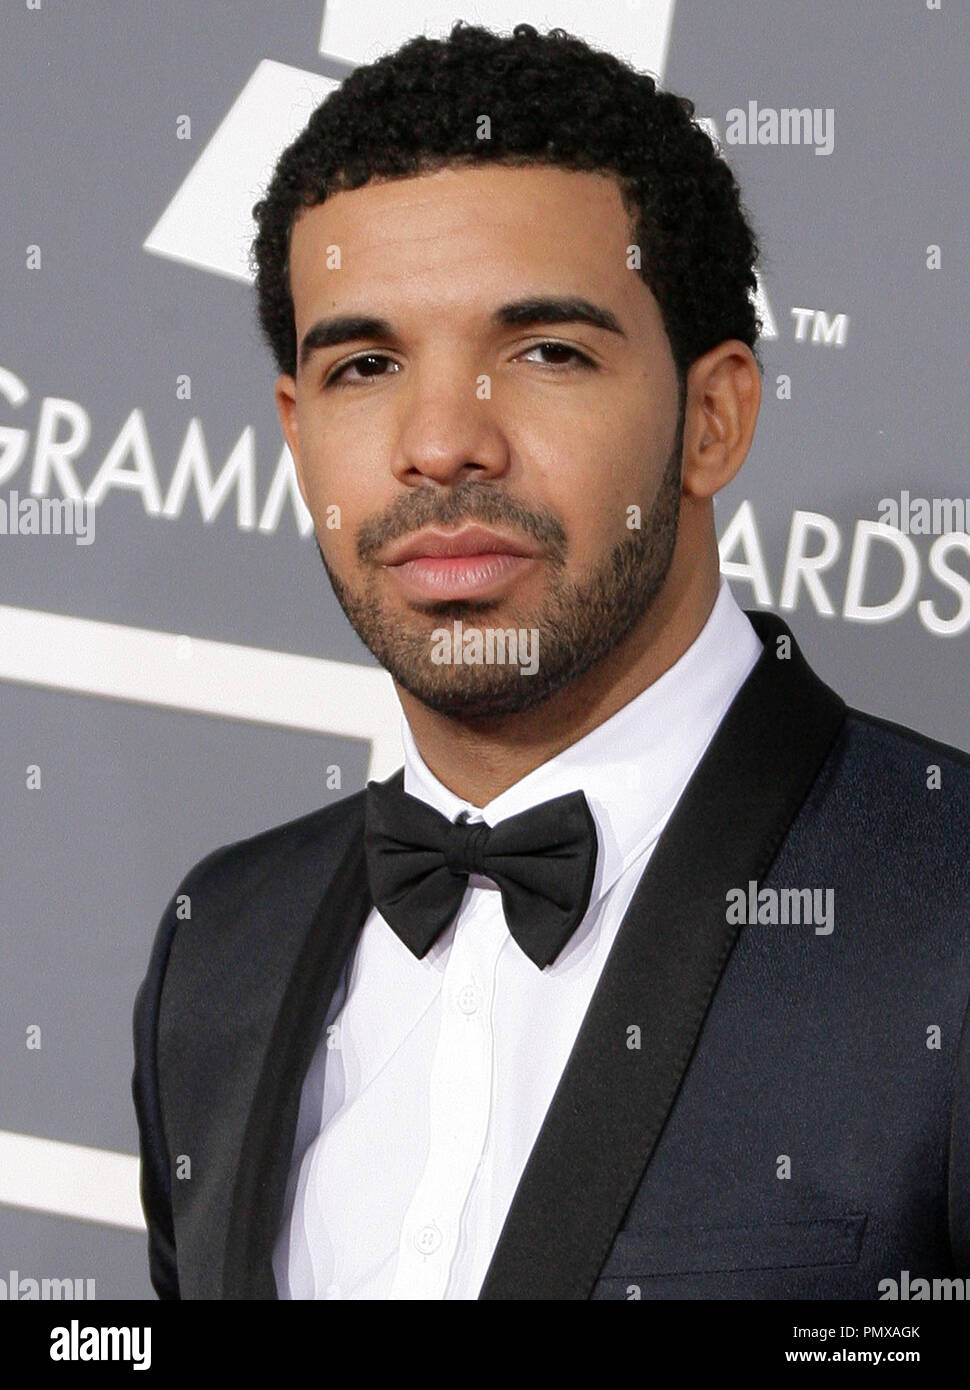 Drake at the 55th Annual Grammy Awards held at the Staples Center in Los Angeles, CA.The event took place on Sunday, February 10, 2013. Photo by PRPP / PictureLux  File Reference # 31836 052PRPP  For Editorial Use Only -  All Rights Reserved Stock Photo